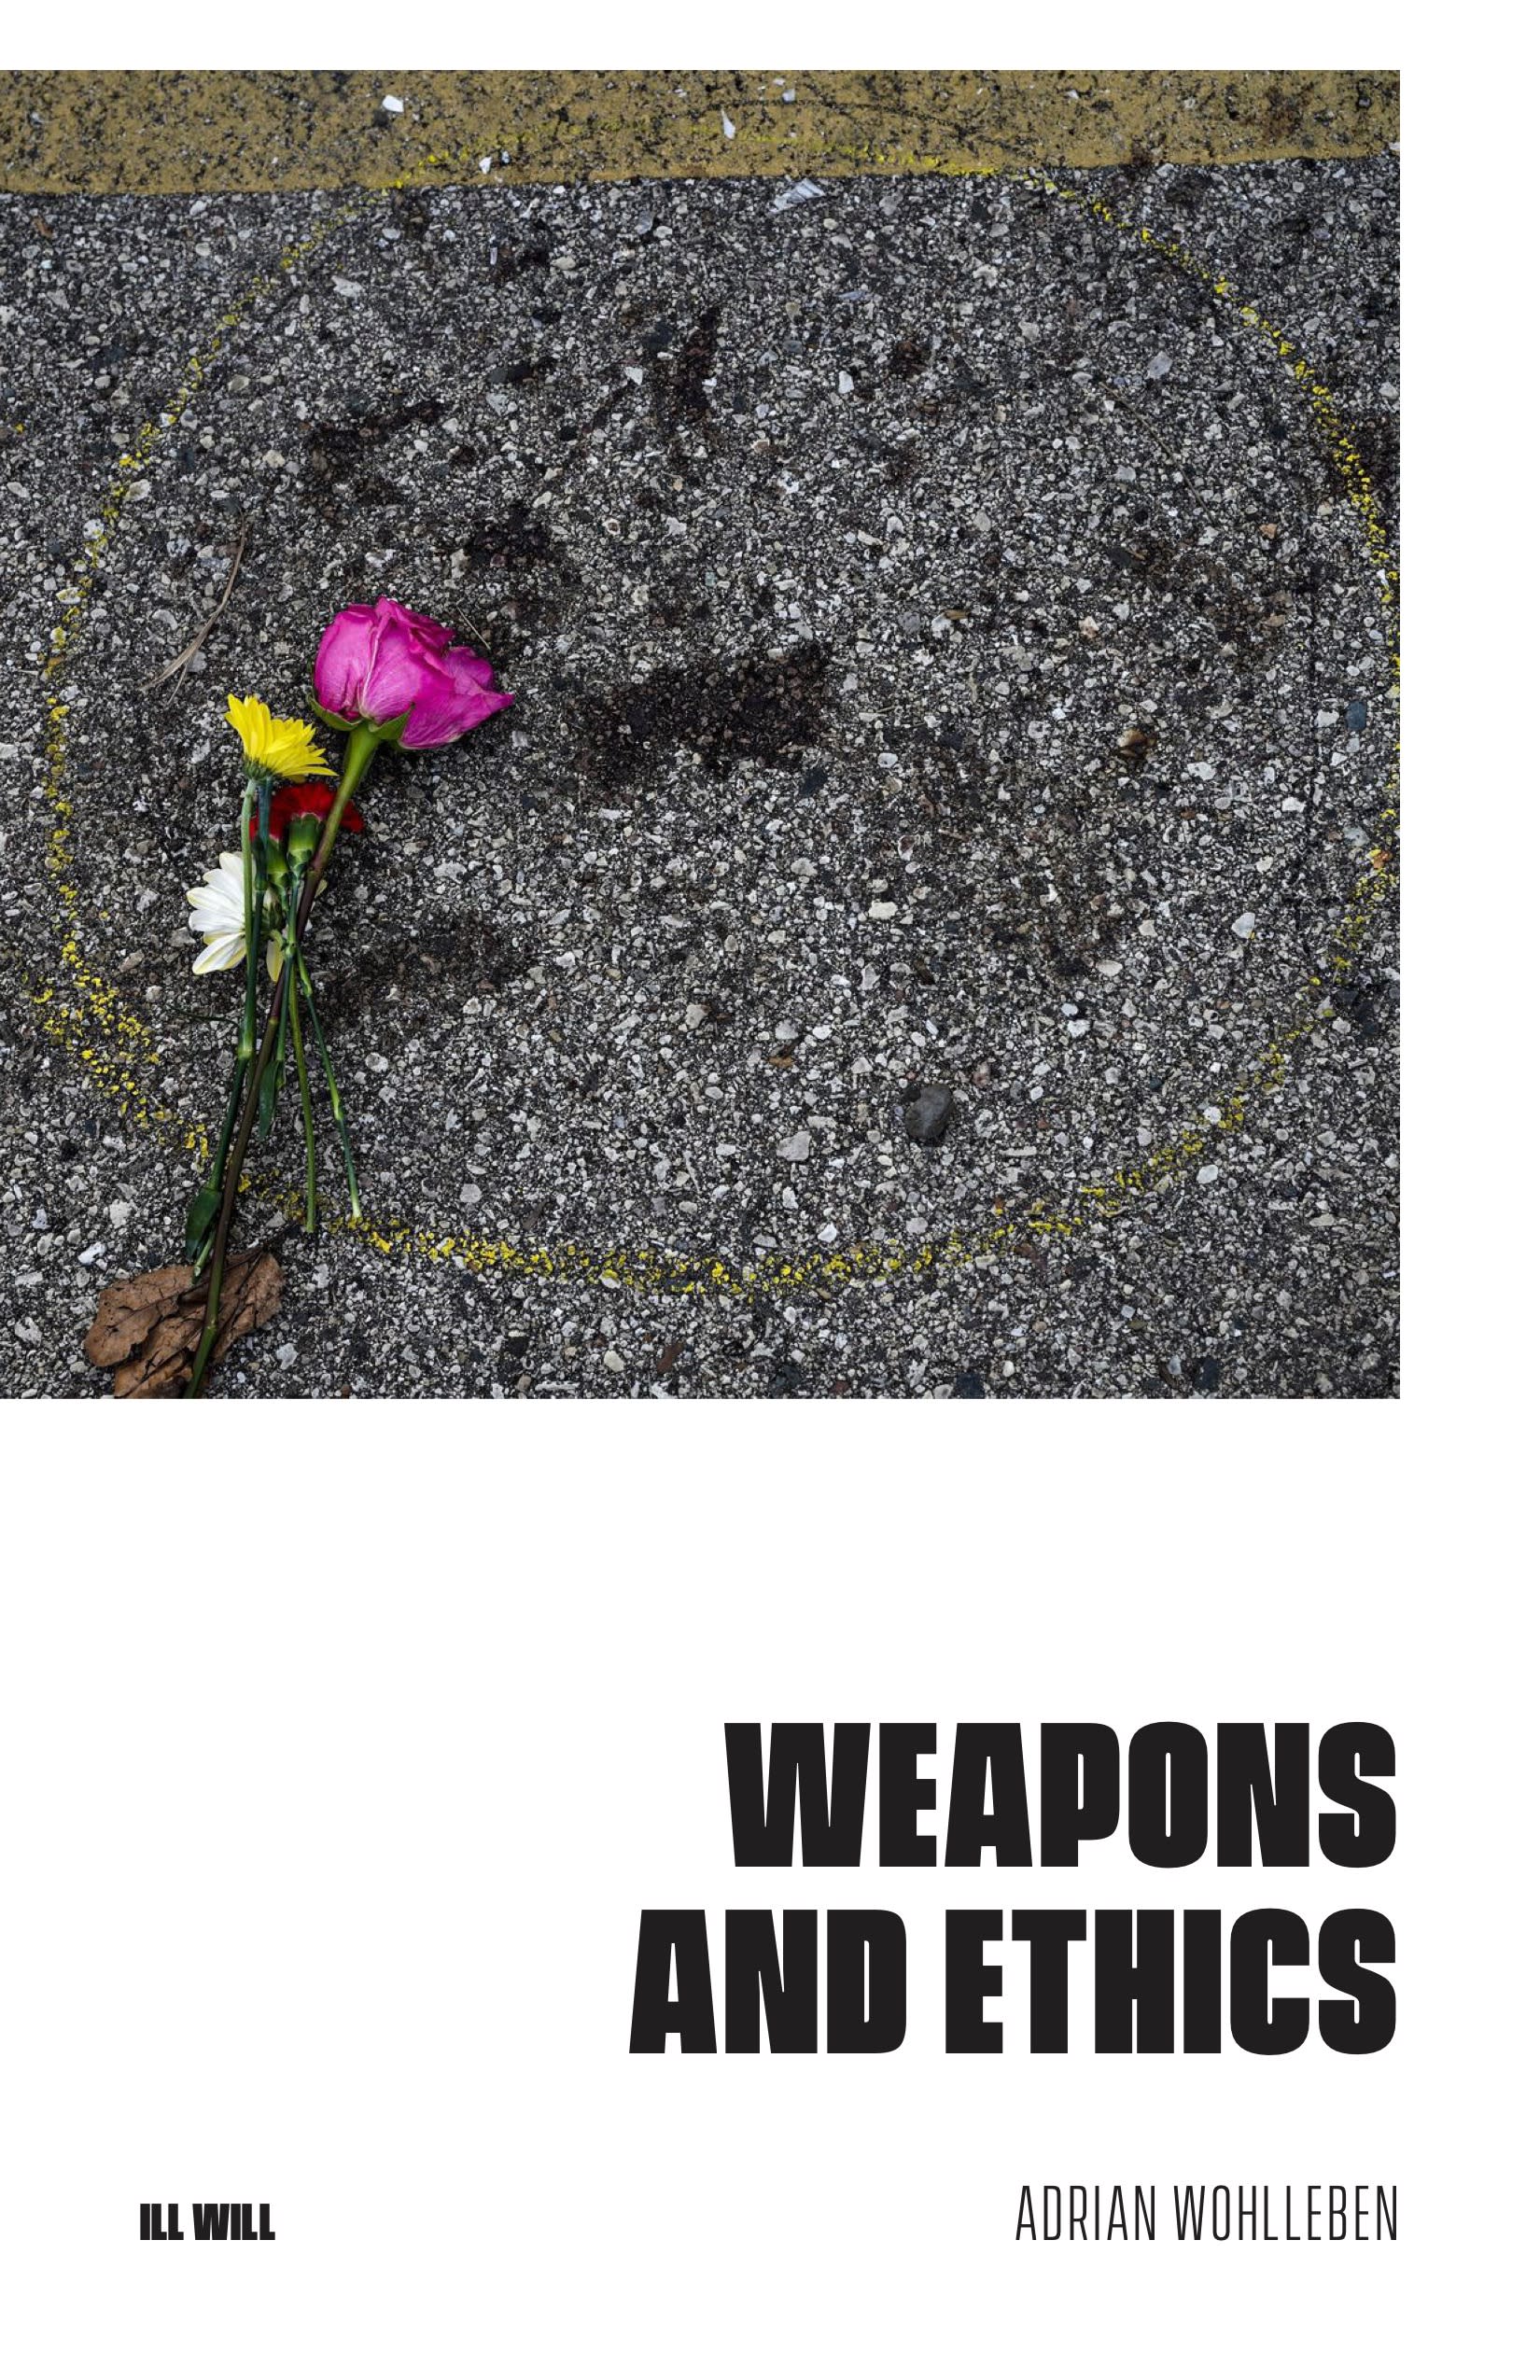 Cover Image for Weapons and Ethics